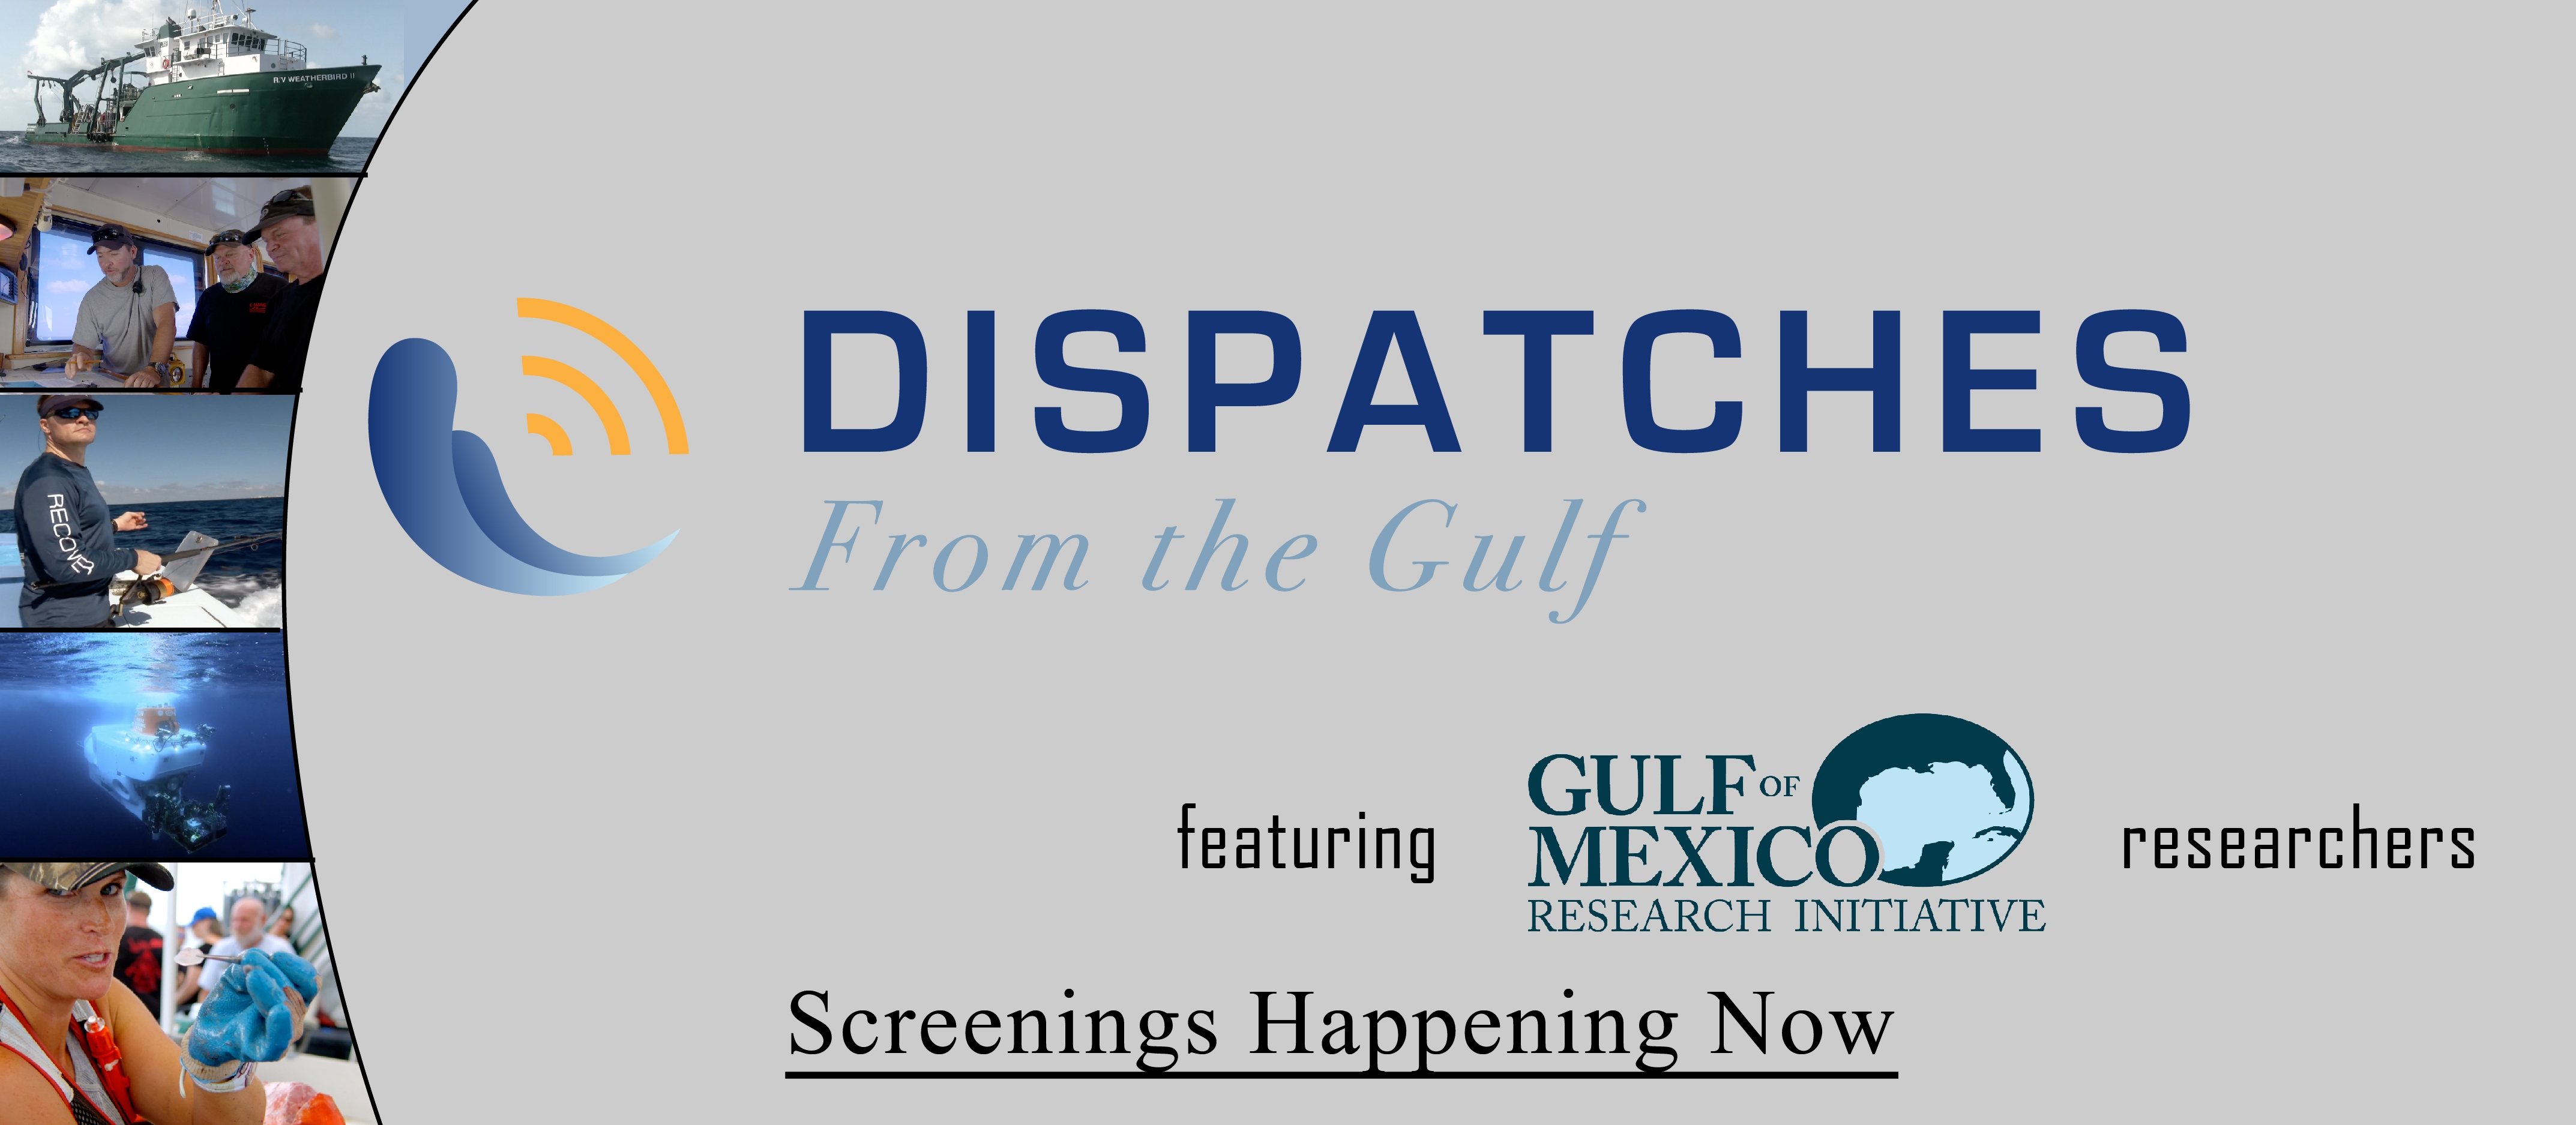 ‘Dispatches From The Gulf’ Emphasizes C-IMAGE Research